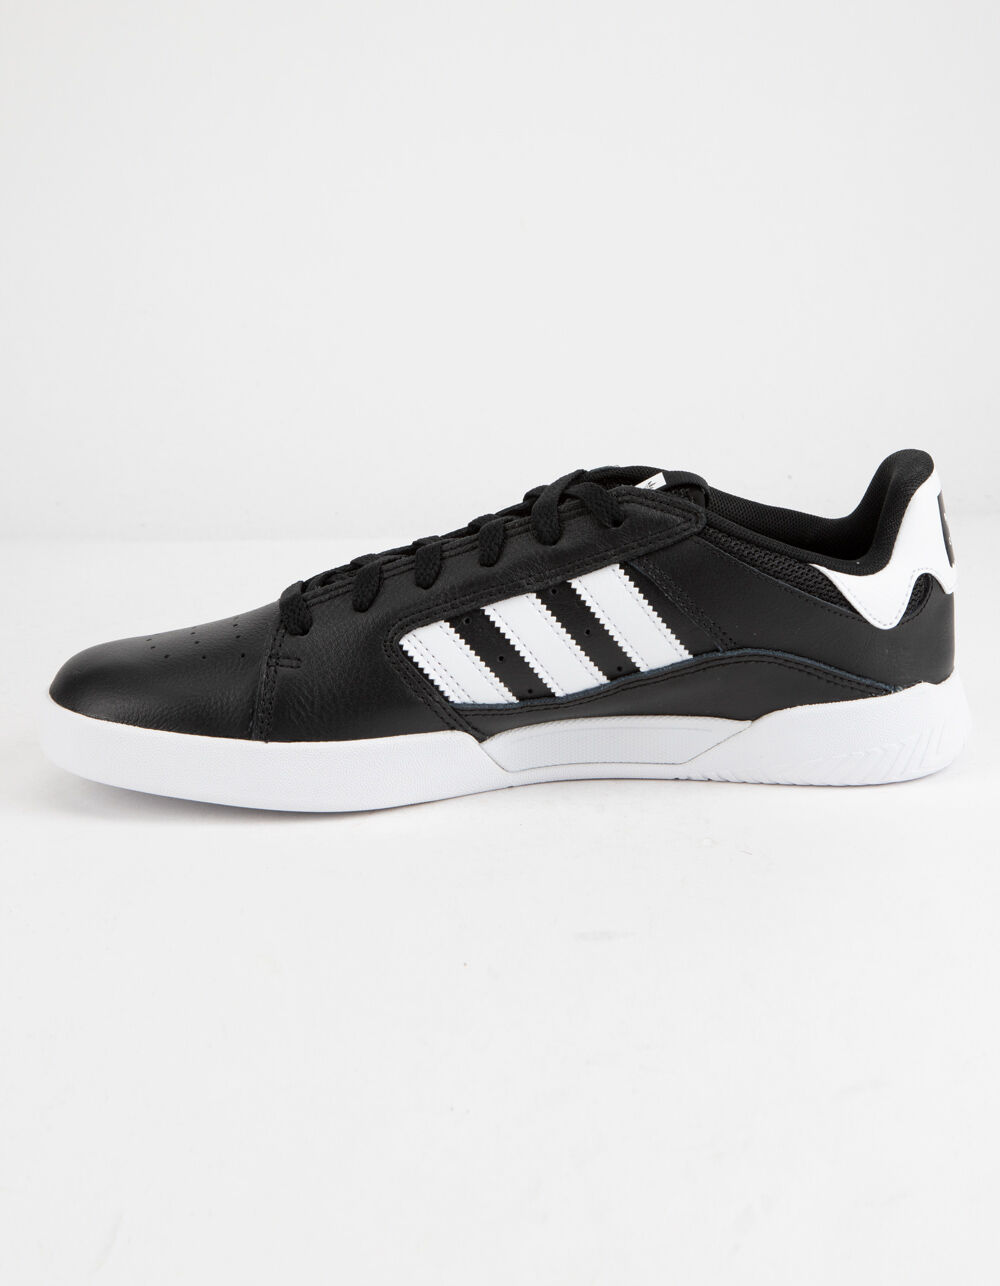 ADIDAS VRX Cup Mens Shoes - BLACK/WHITE | Tillys